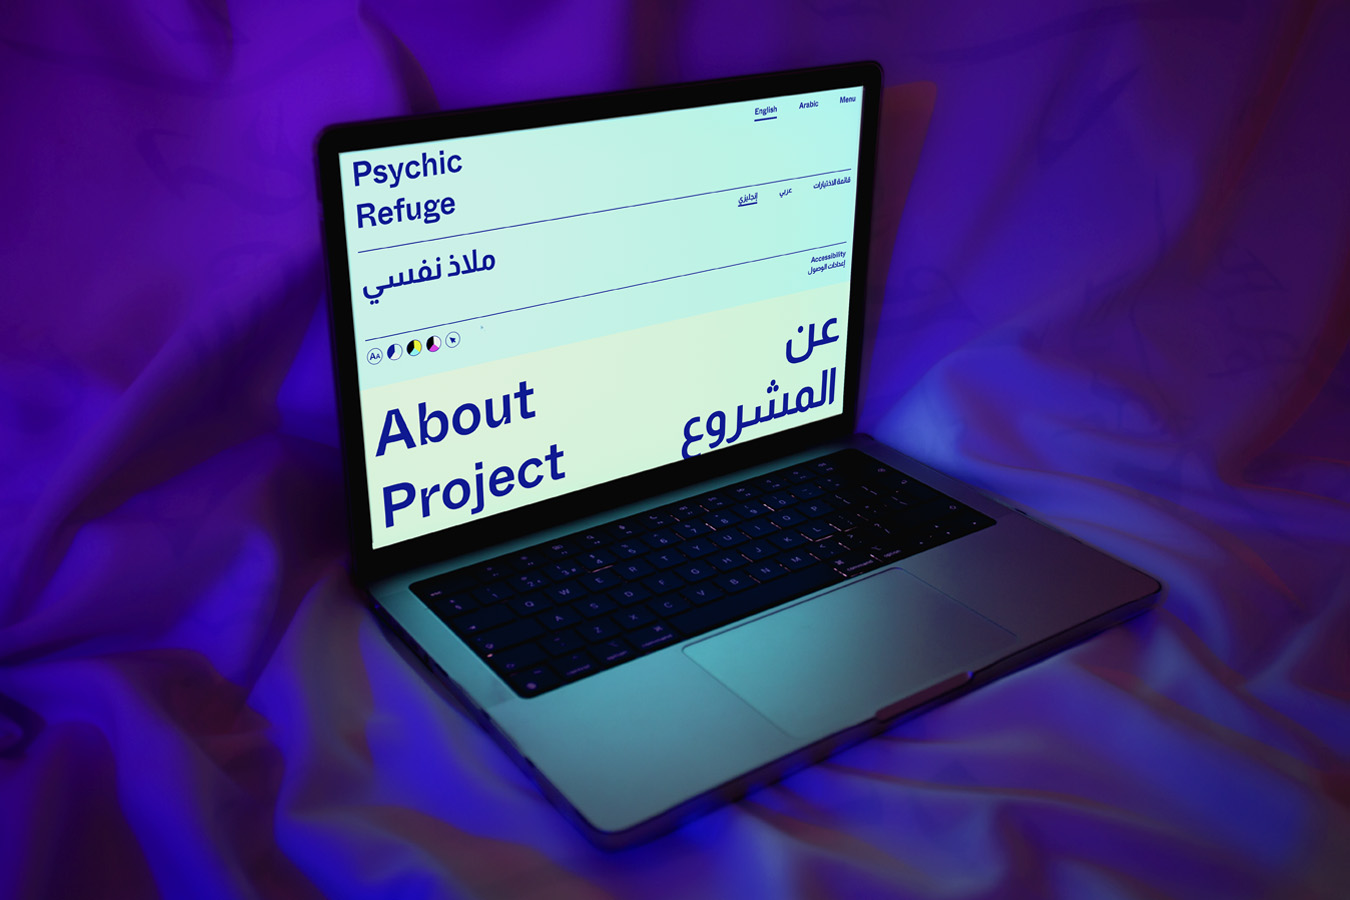 alt: Image shows a laptop on a purple fabric, on the laptops screen is the Psychic Refuge website homepage